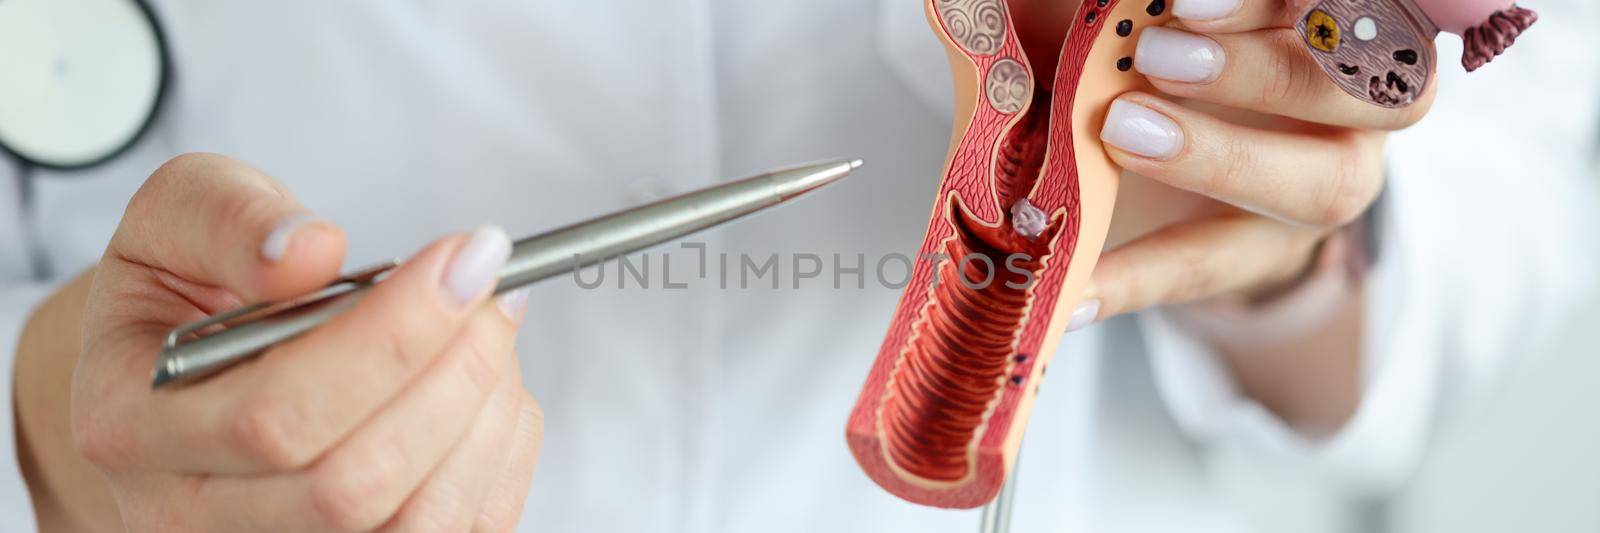 Doctor gynecologist showing pen on plastic model of uterus and ovaries closeup. Diagnostics and treatment of gynecological diseases concept